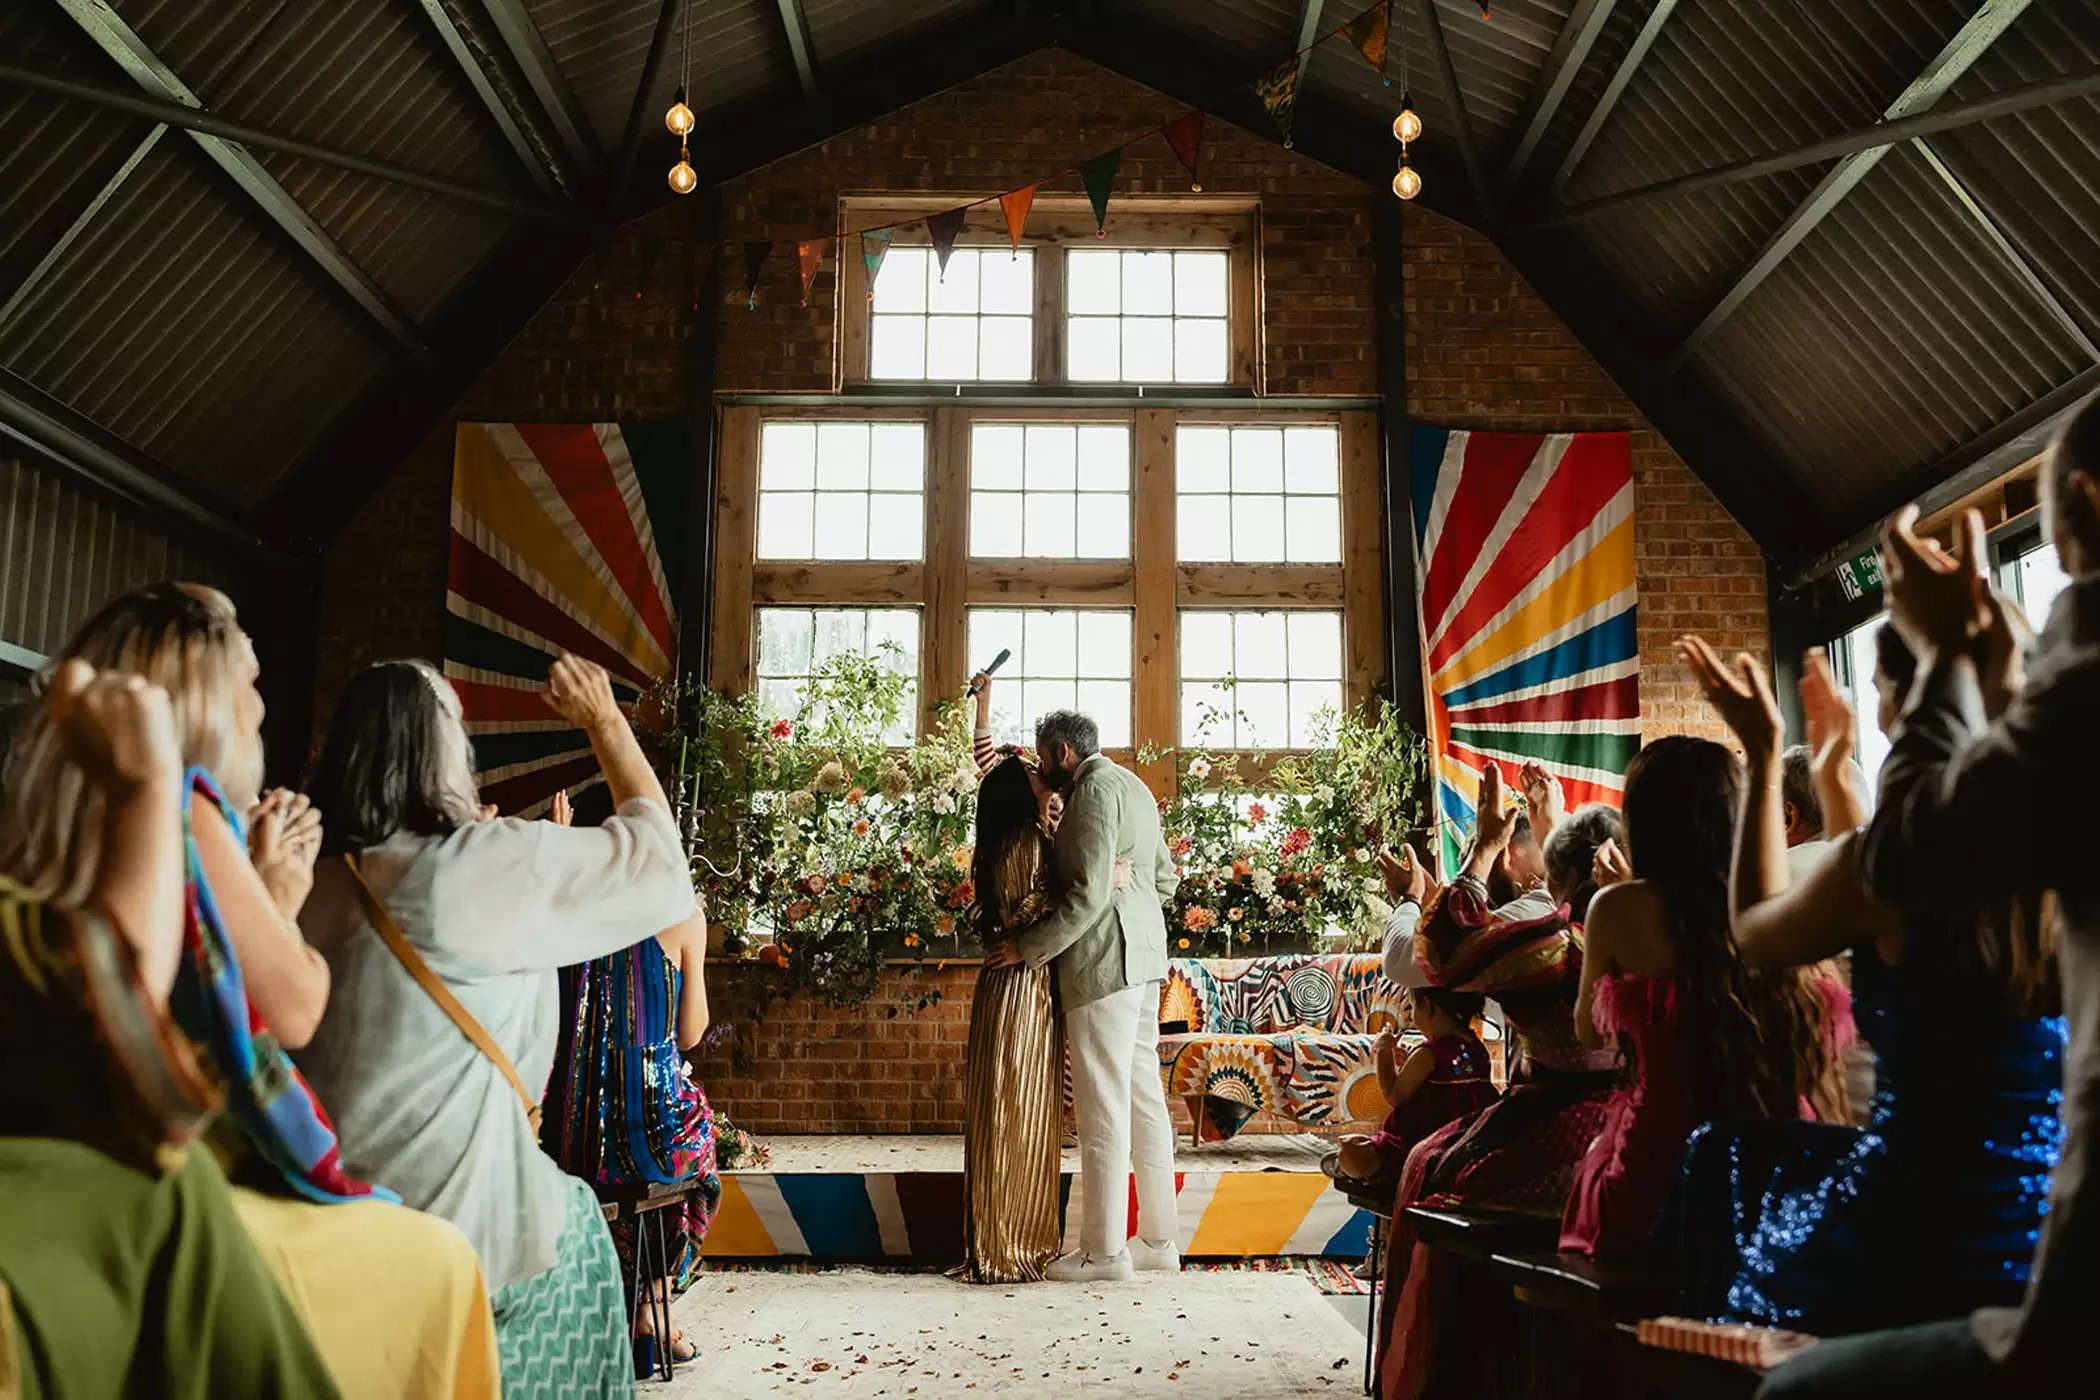 The Bride Wore a Gold Gown for This Vibrant + Distinctive Wedding ceremony in Wales